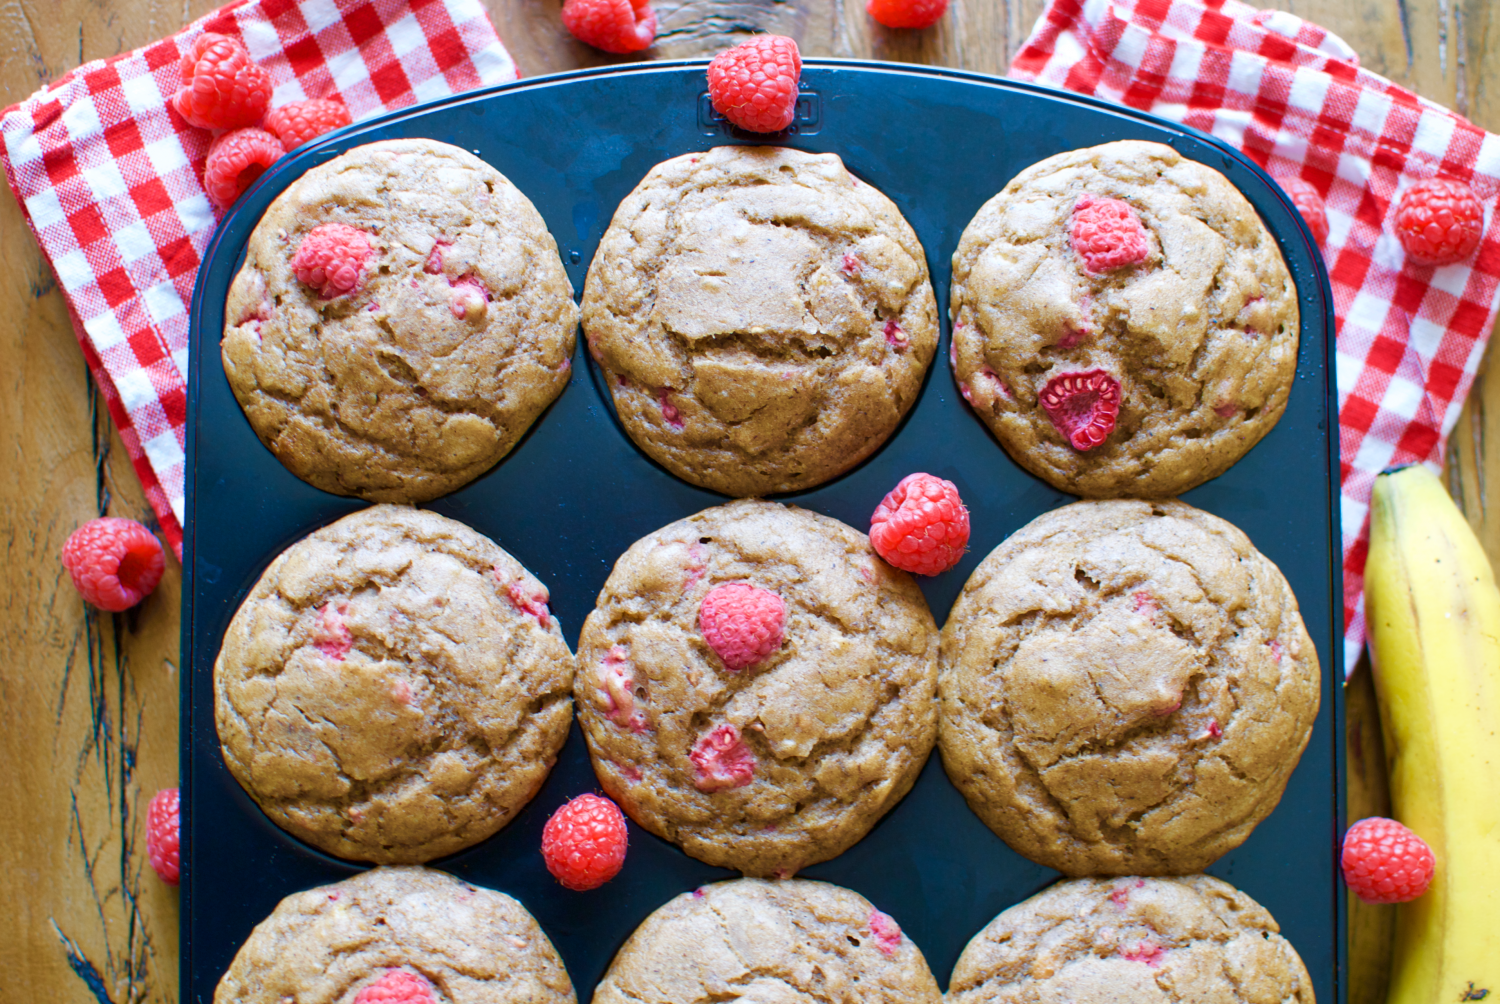 Healthified banana muffins with peanut butter and raspberries